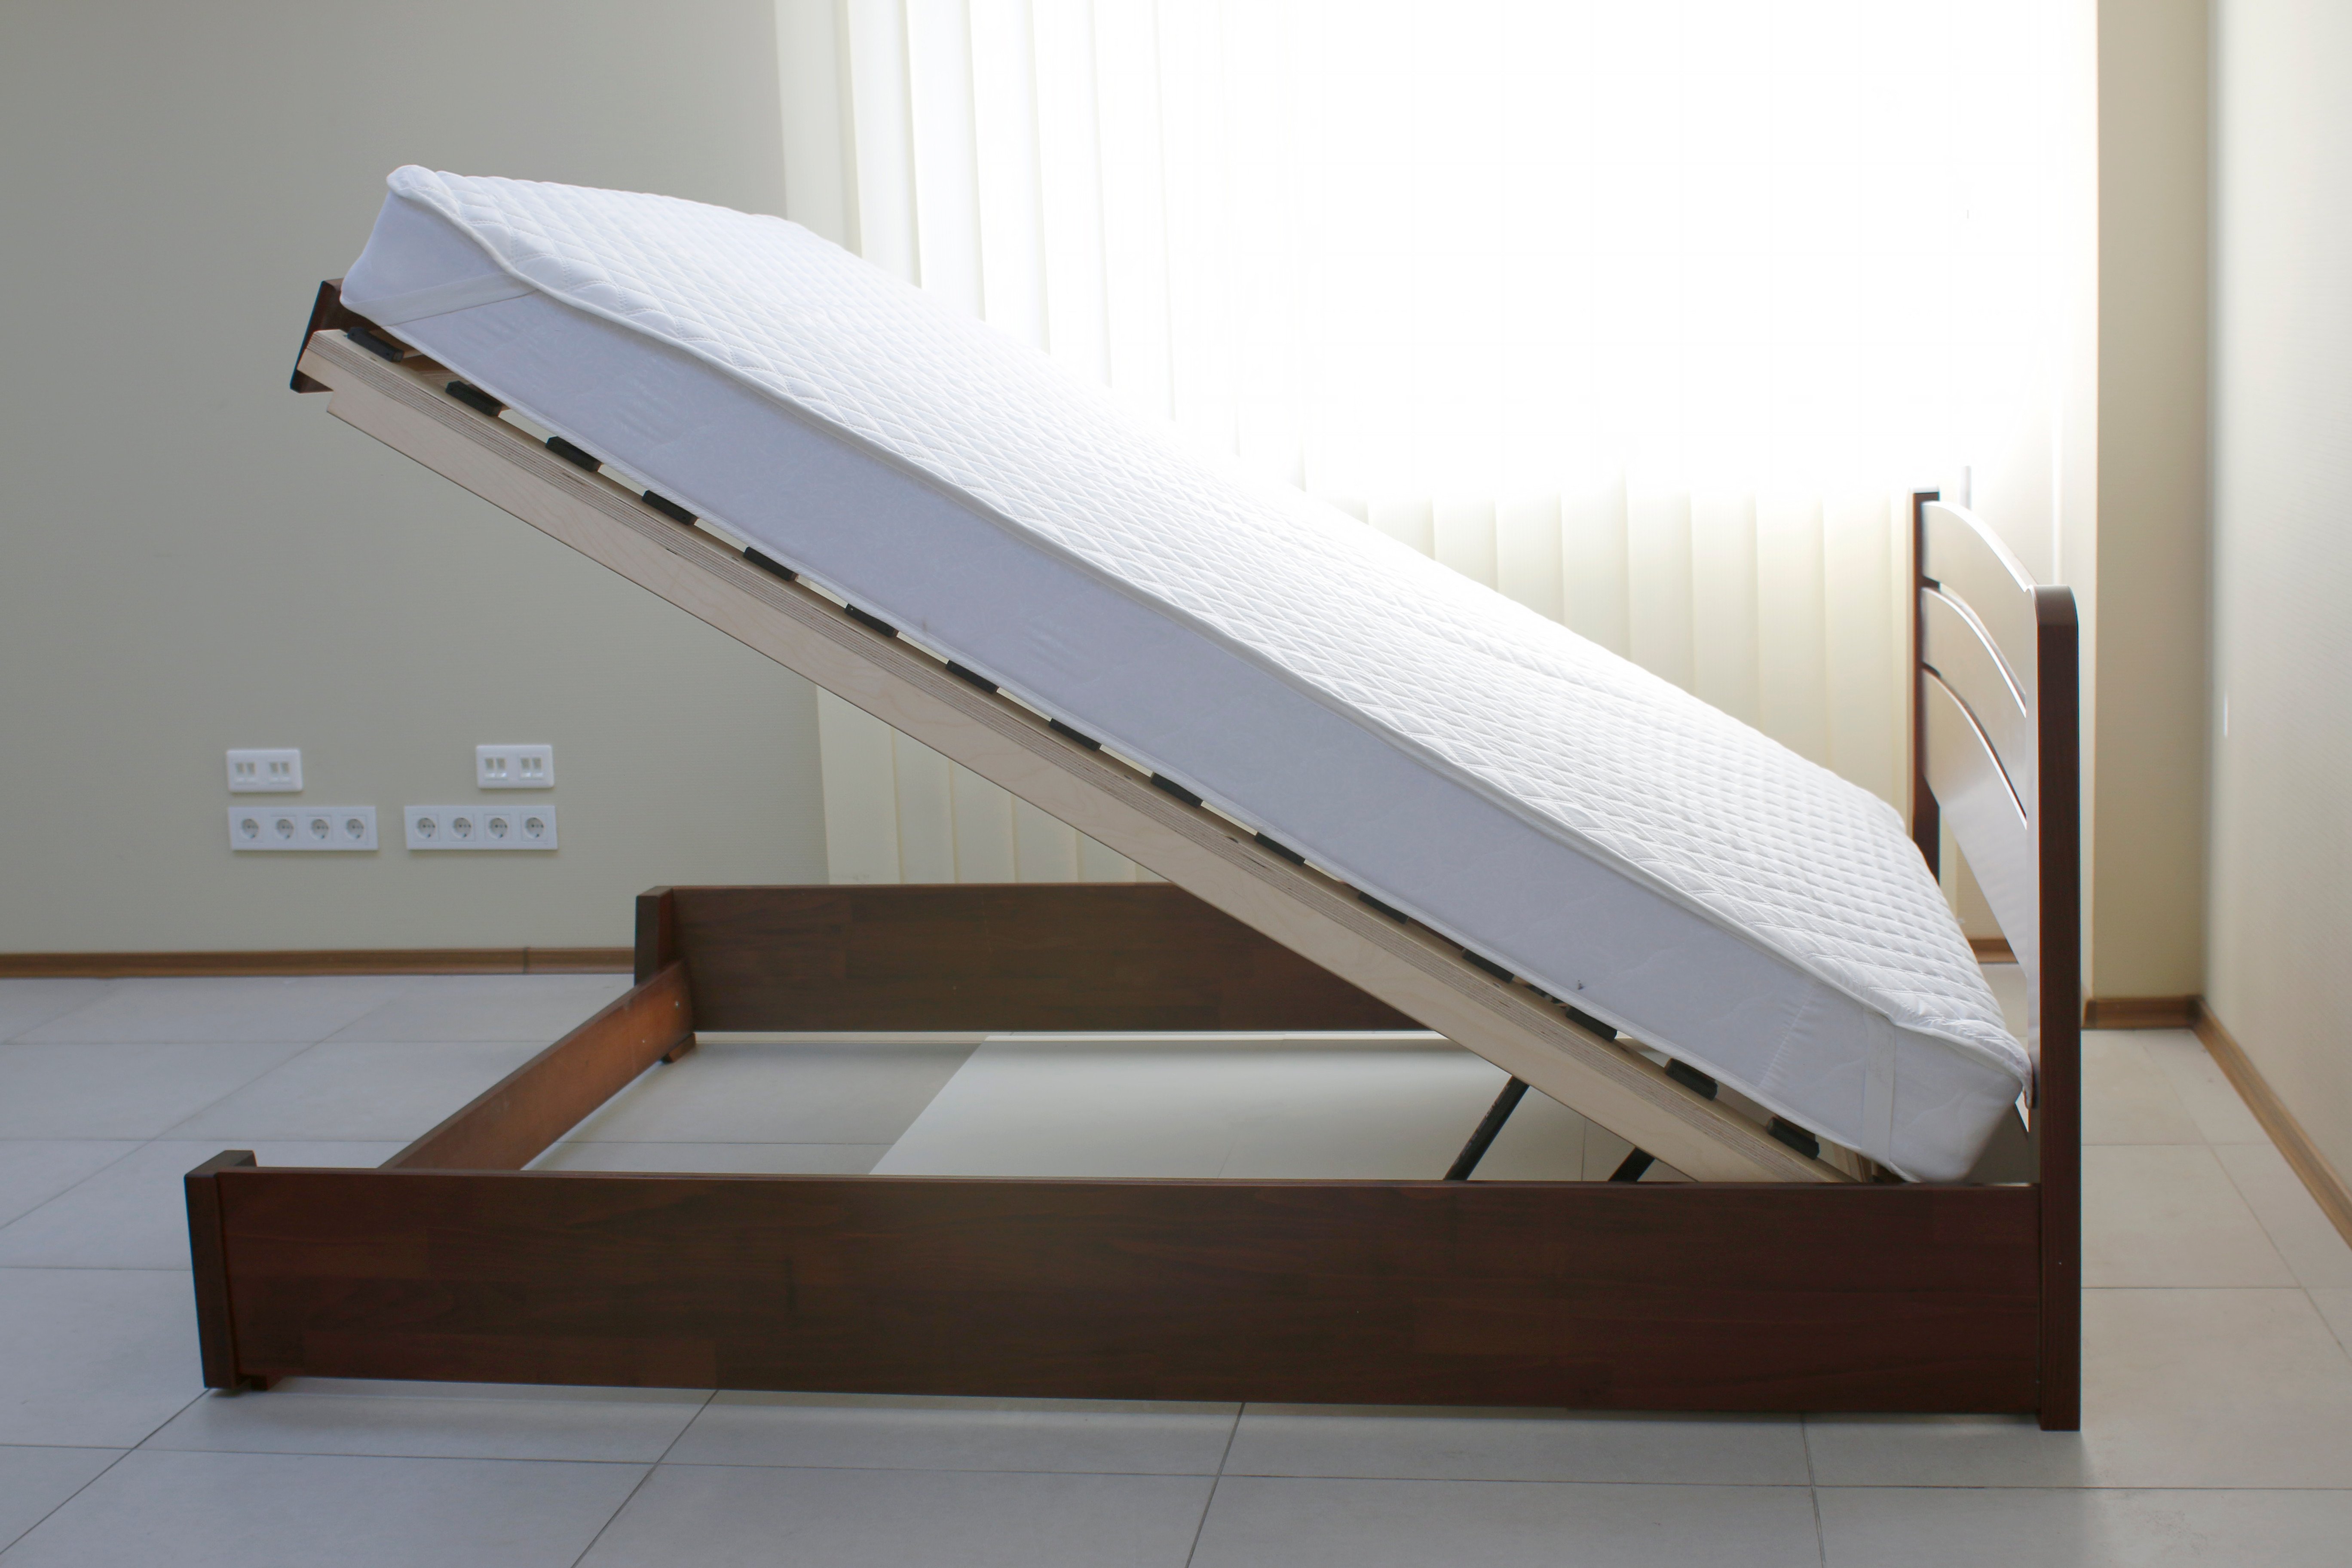 Queen sized bed that lifts up to reveal storage space underneath